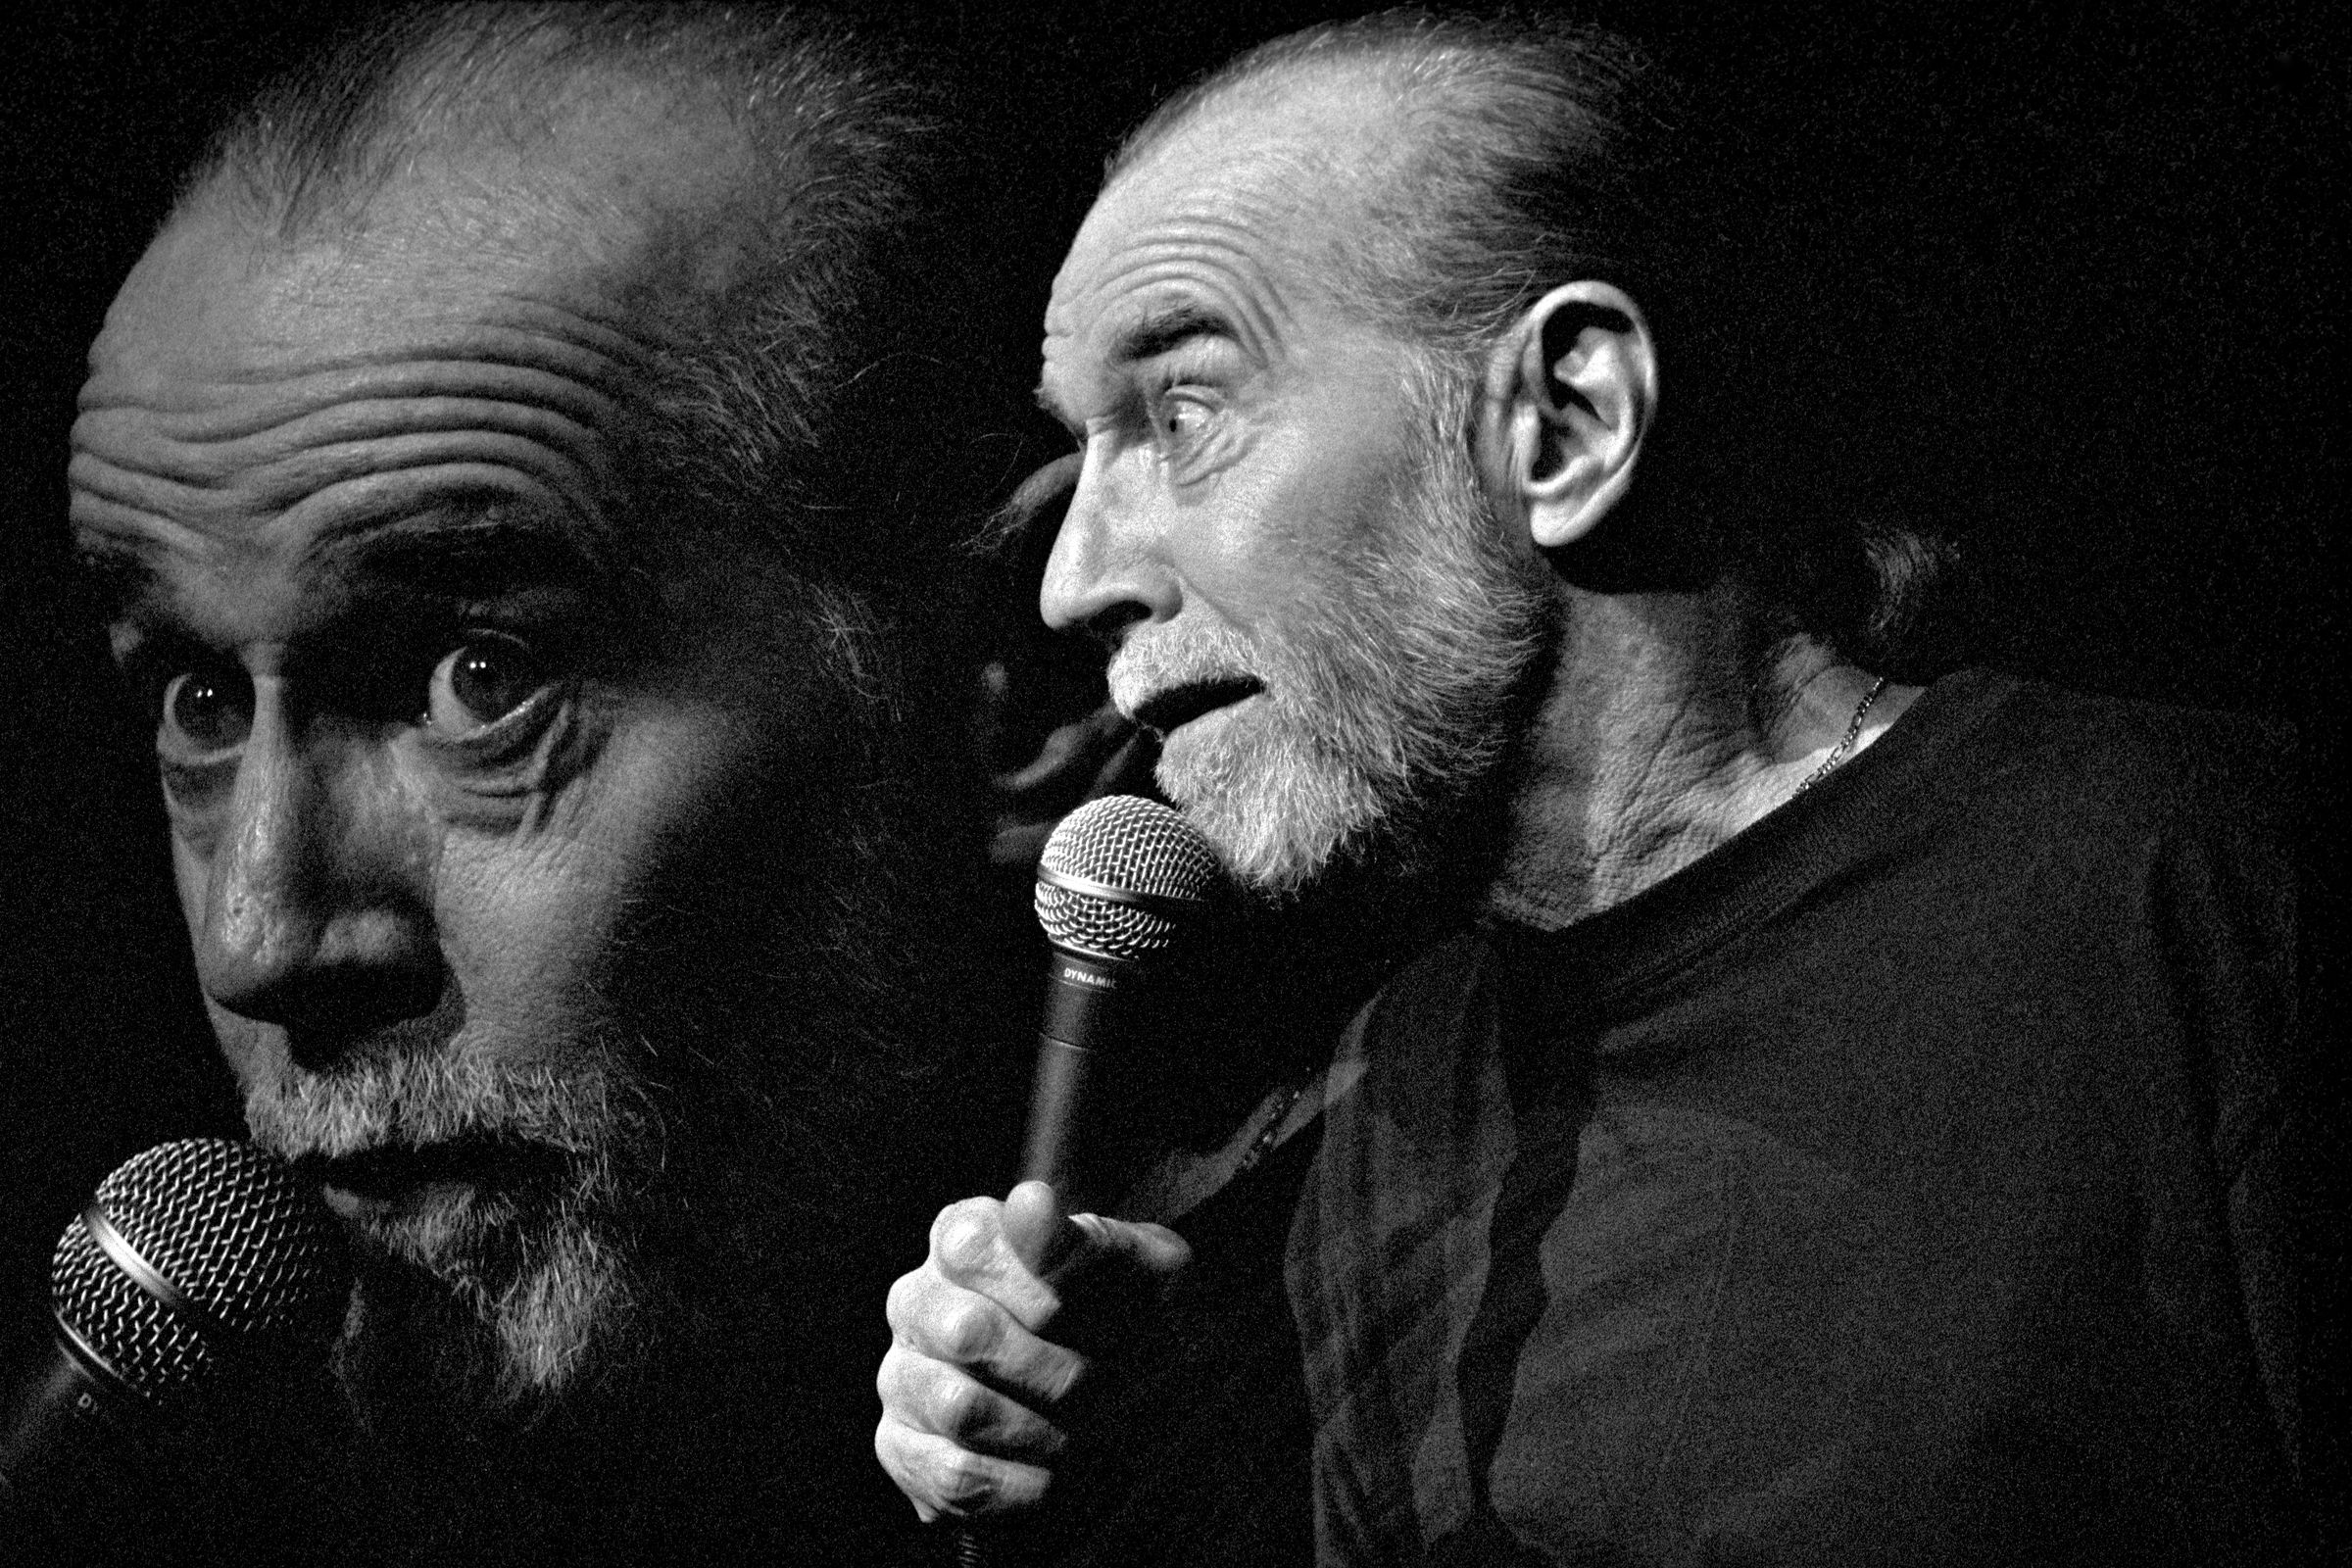 George Denis Patrick Carlin performs a standup routine at the Cheyenne Civic Center on June 1, 1992 in Cheyenne, Wyoming.